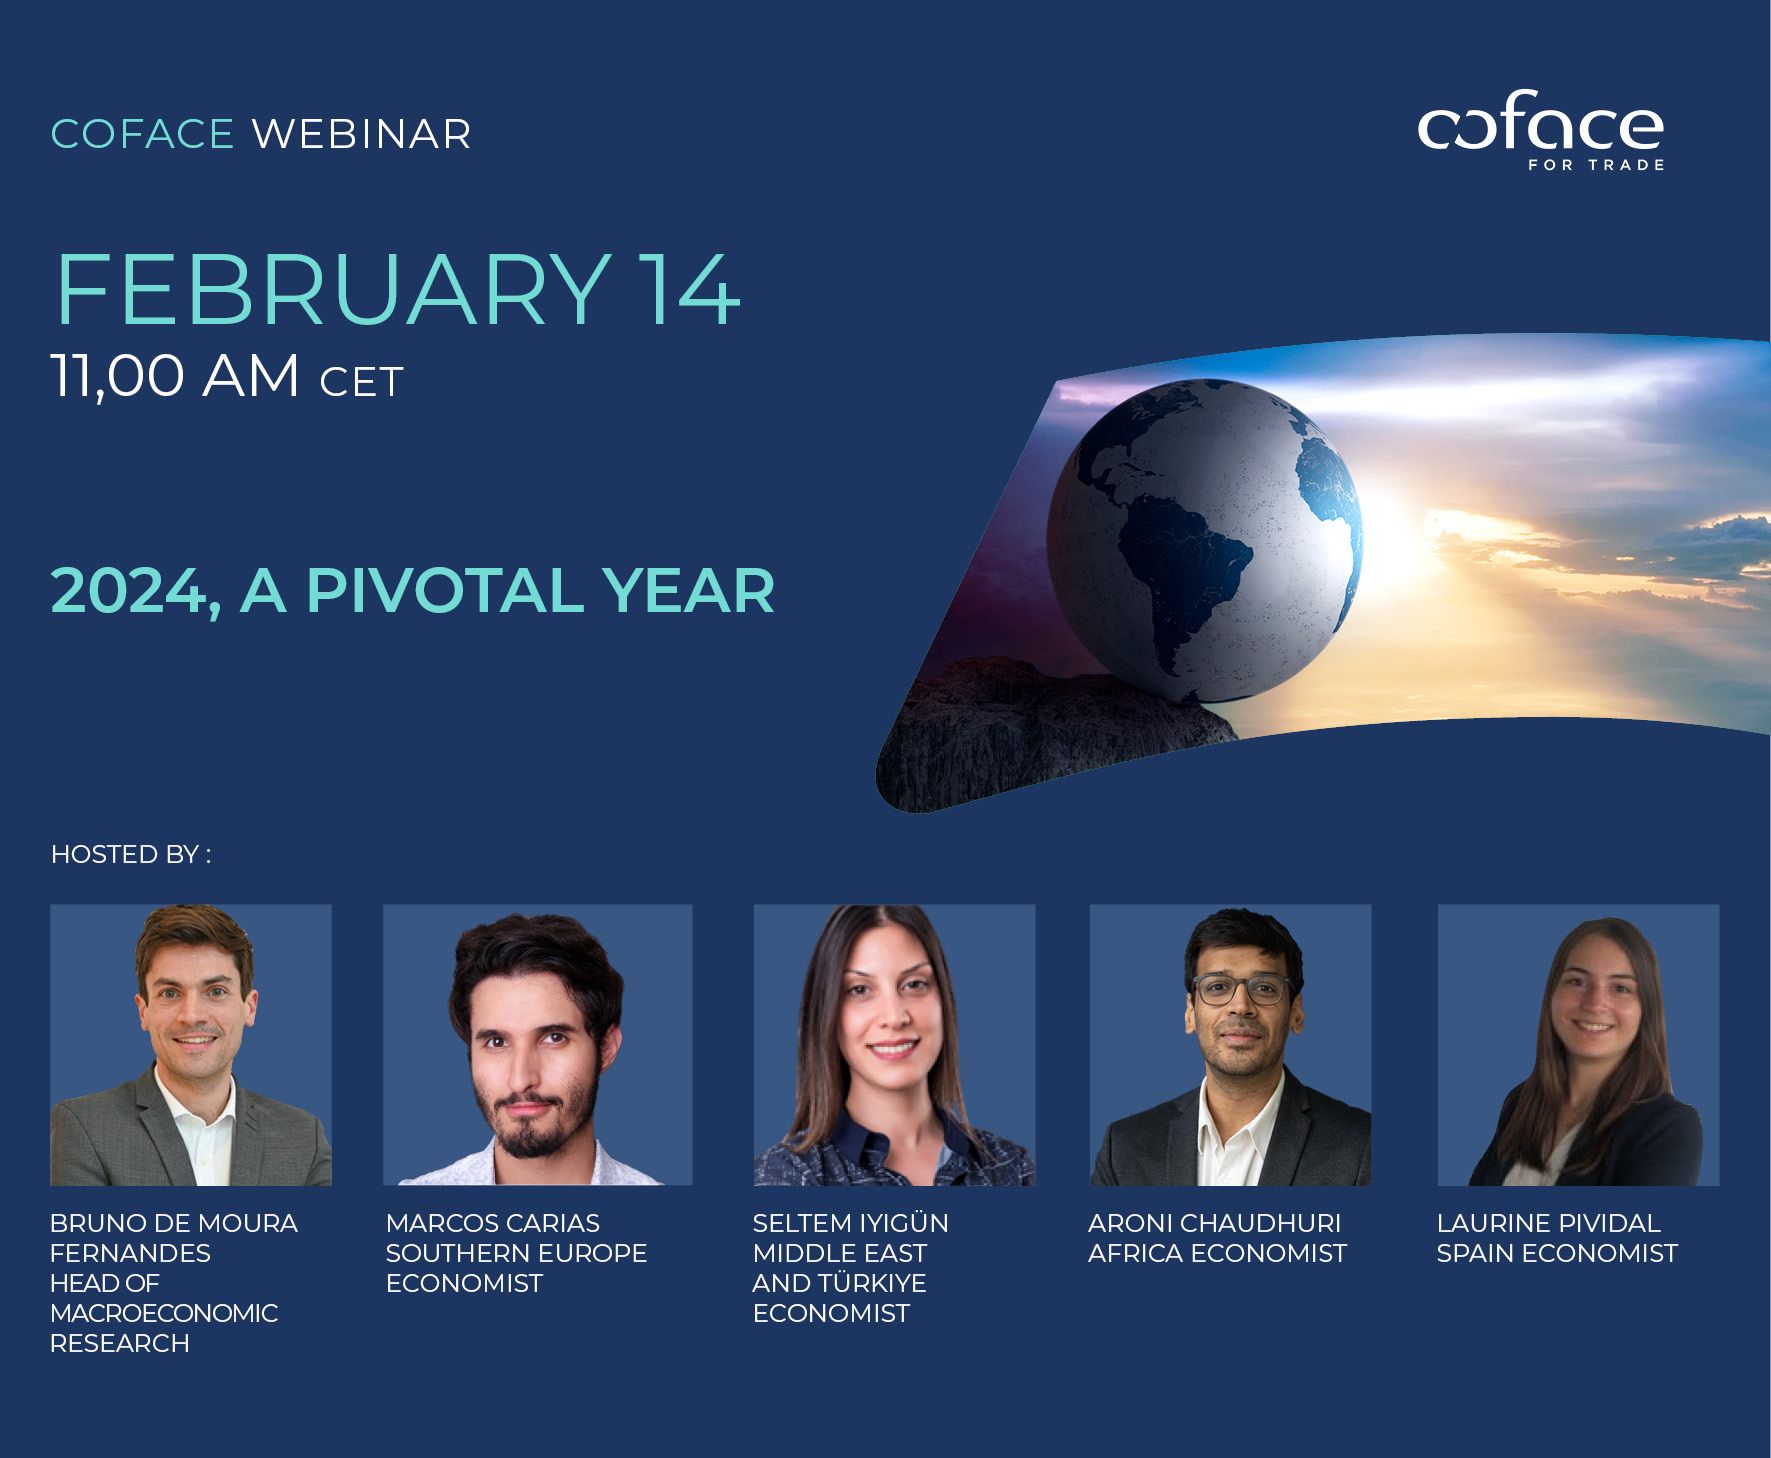 Coface Webinar: 2024, a pivotal year. On February 14 at 11,00 AM CET. Hosted by 5 Coface experts: Bruno de Moura Fernance, Marcos Carias, Seltem Iyigün, Aroni Chaudhuri and Laurine Pividal.